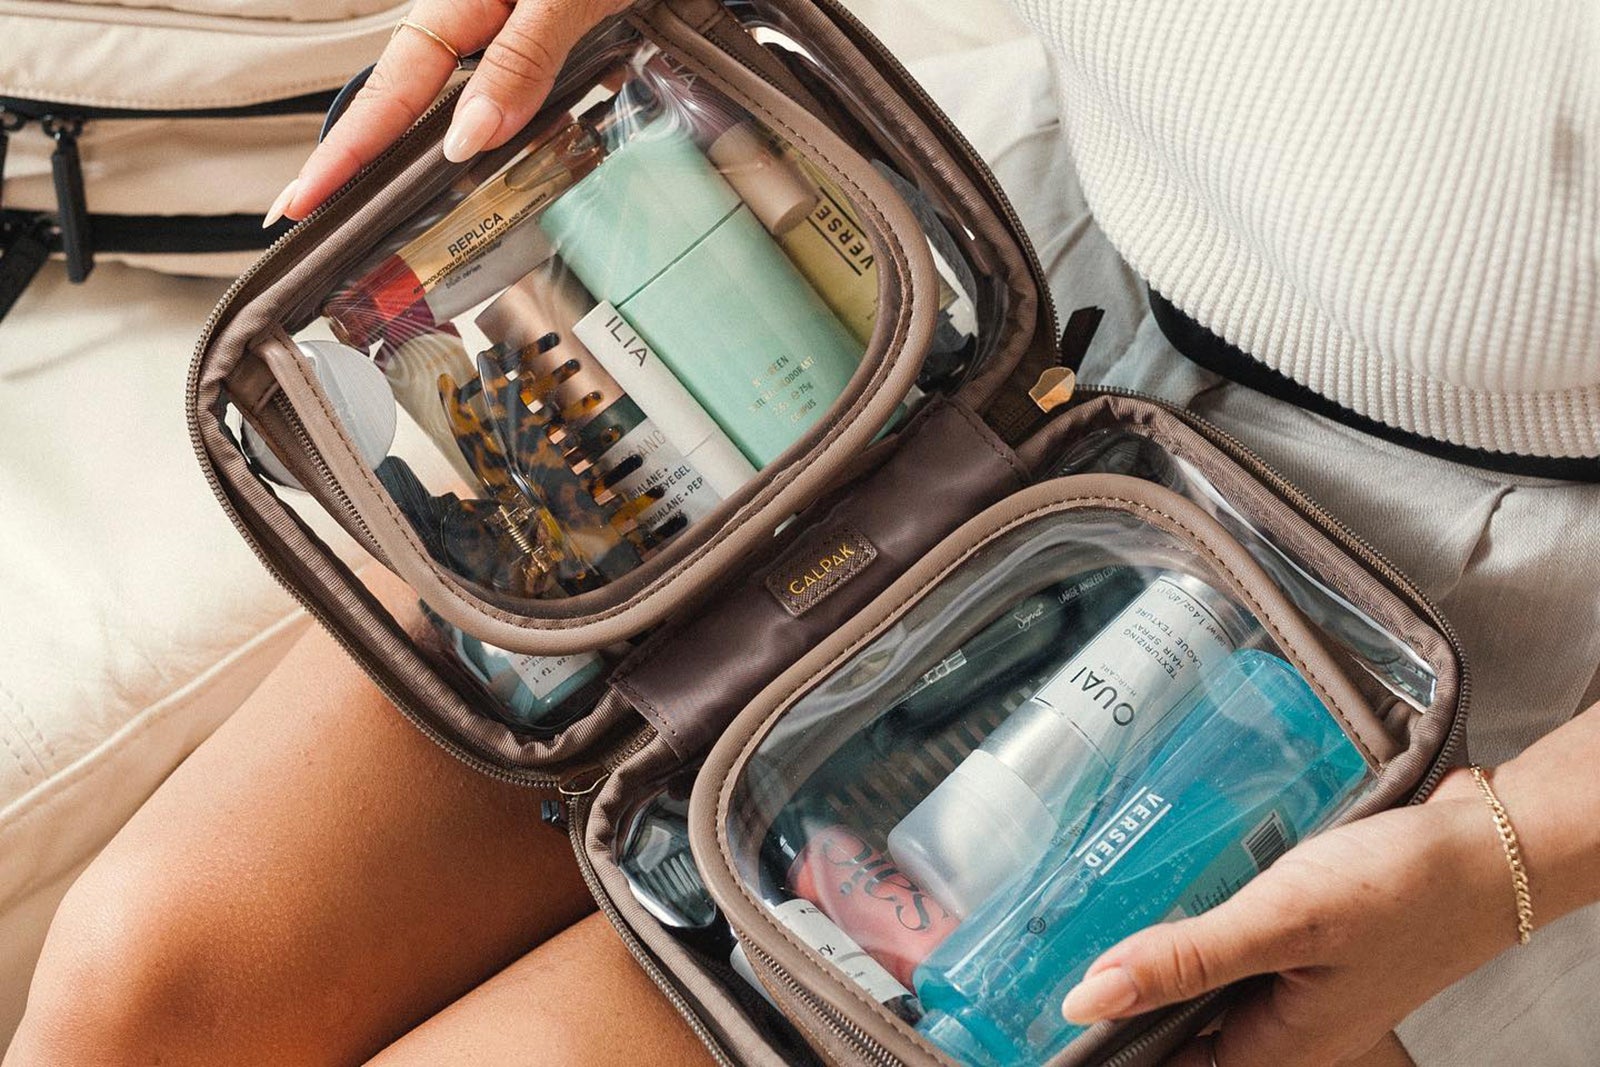 best toiletry bag for air travel